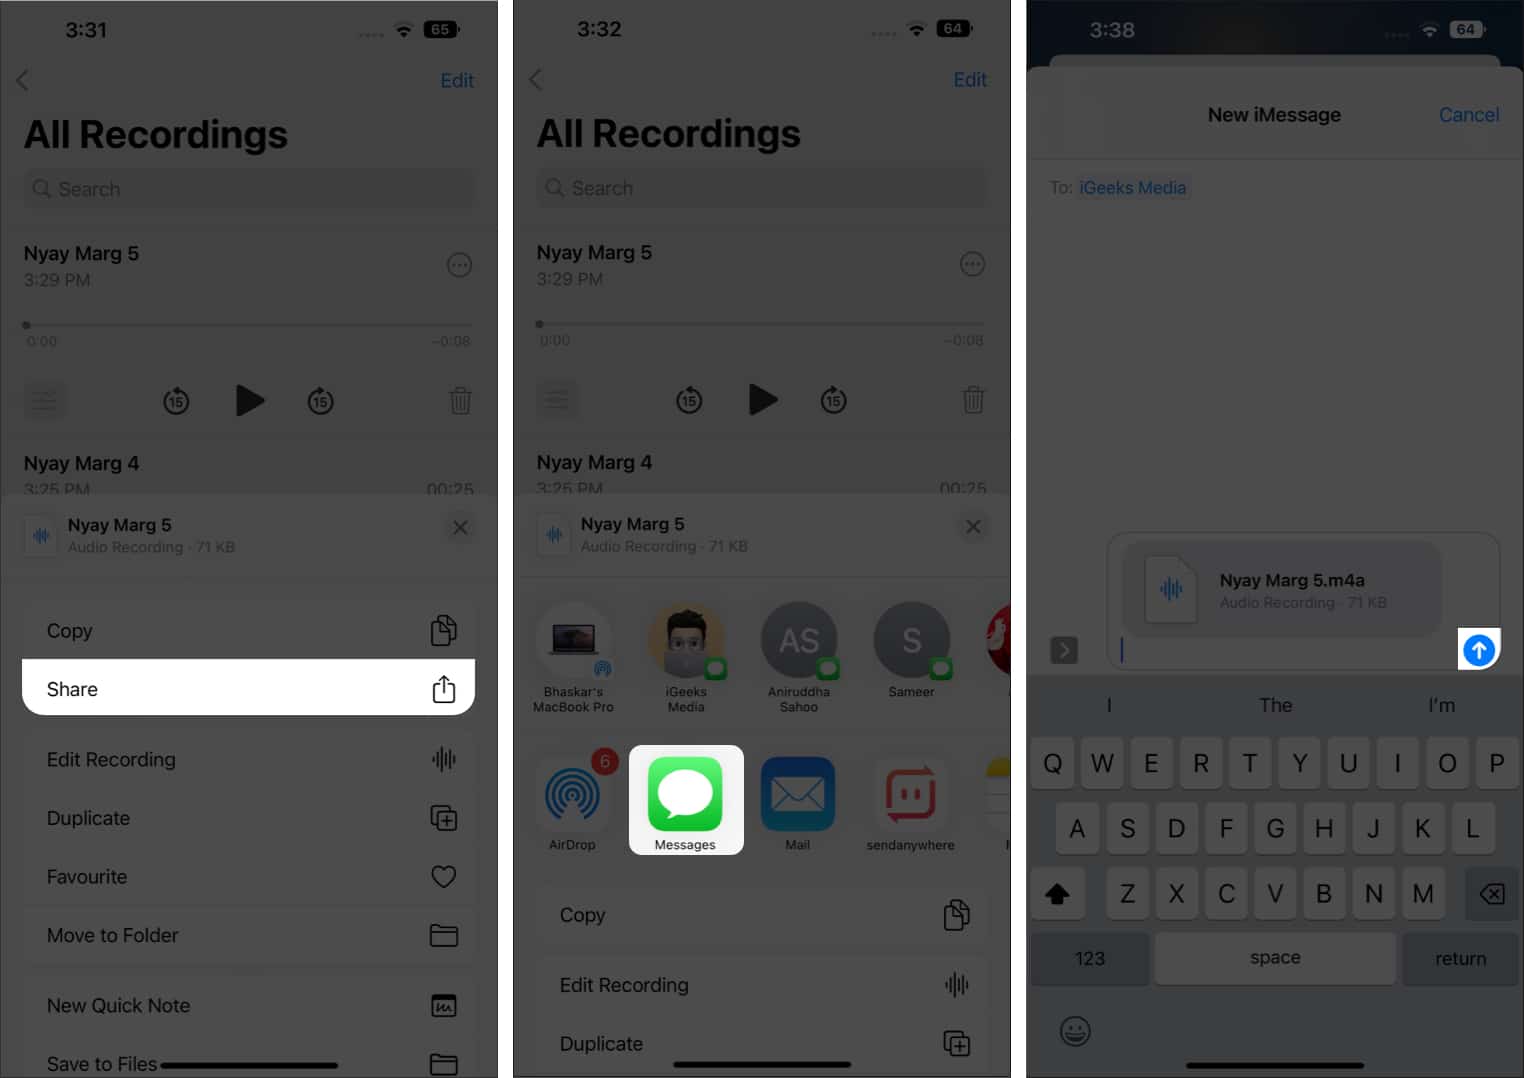 How to send audio messages using the Voice Memos app